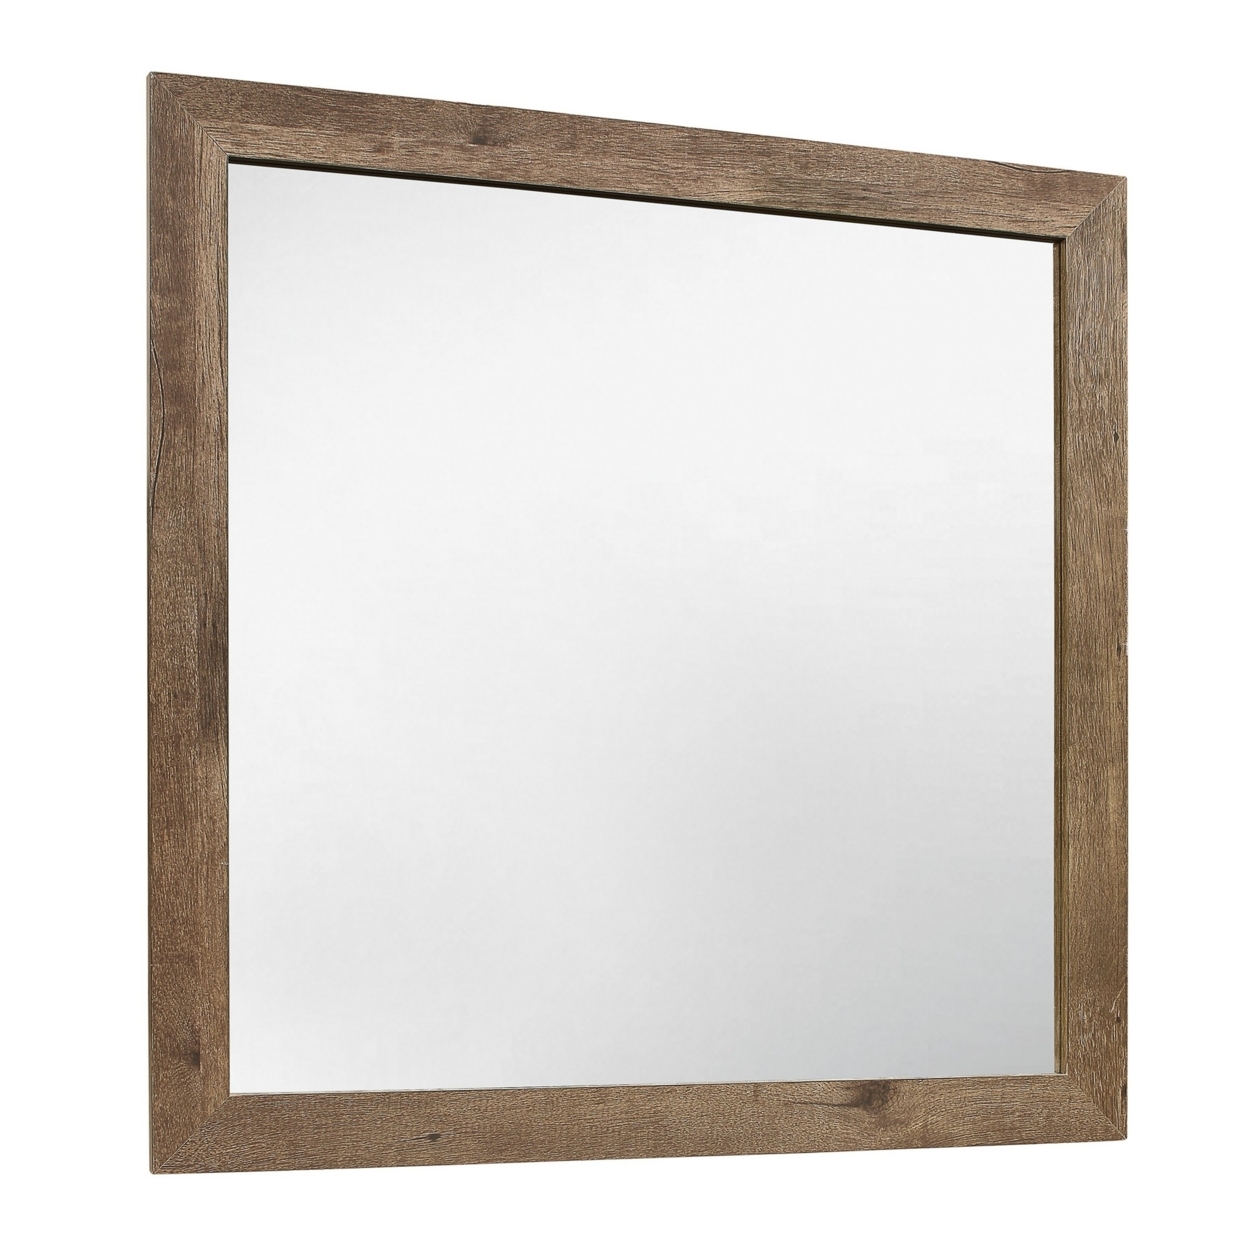 Square Wooden Frame Mirror With Rough Hewn Saw Texture, Brown And Silver- Saltoro Sherpi